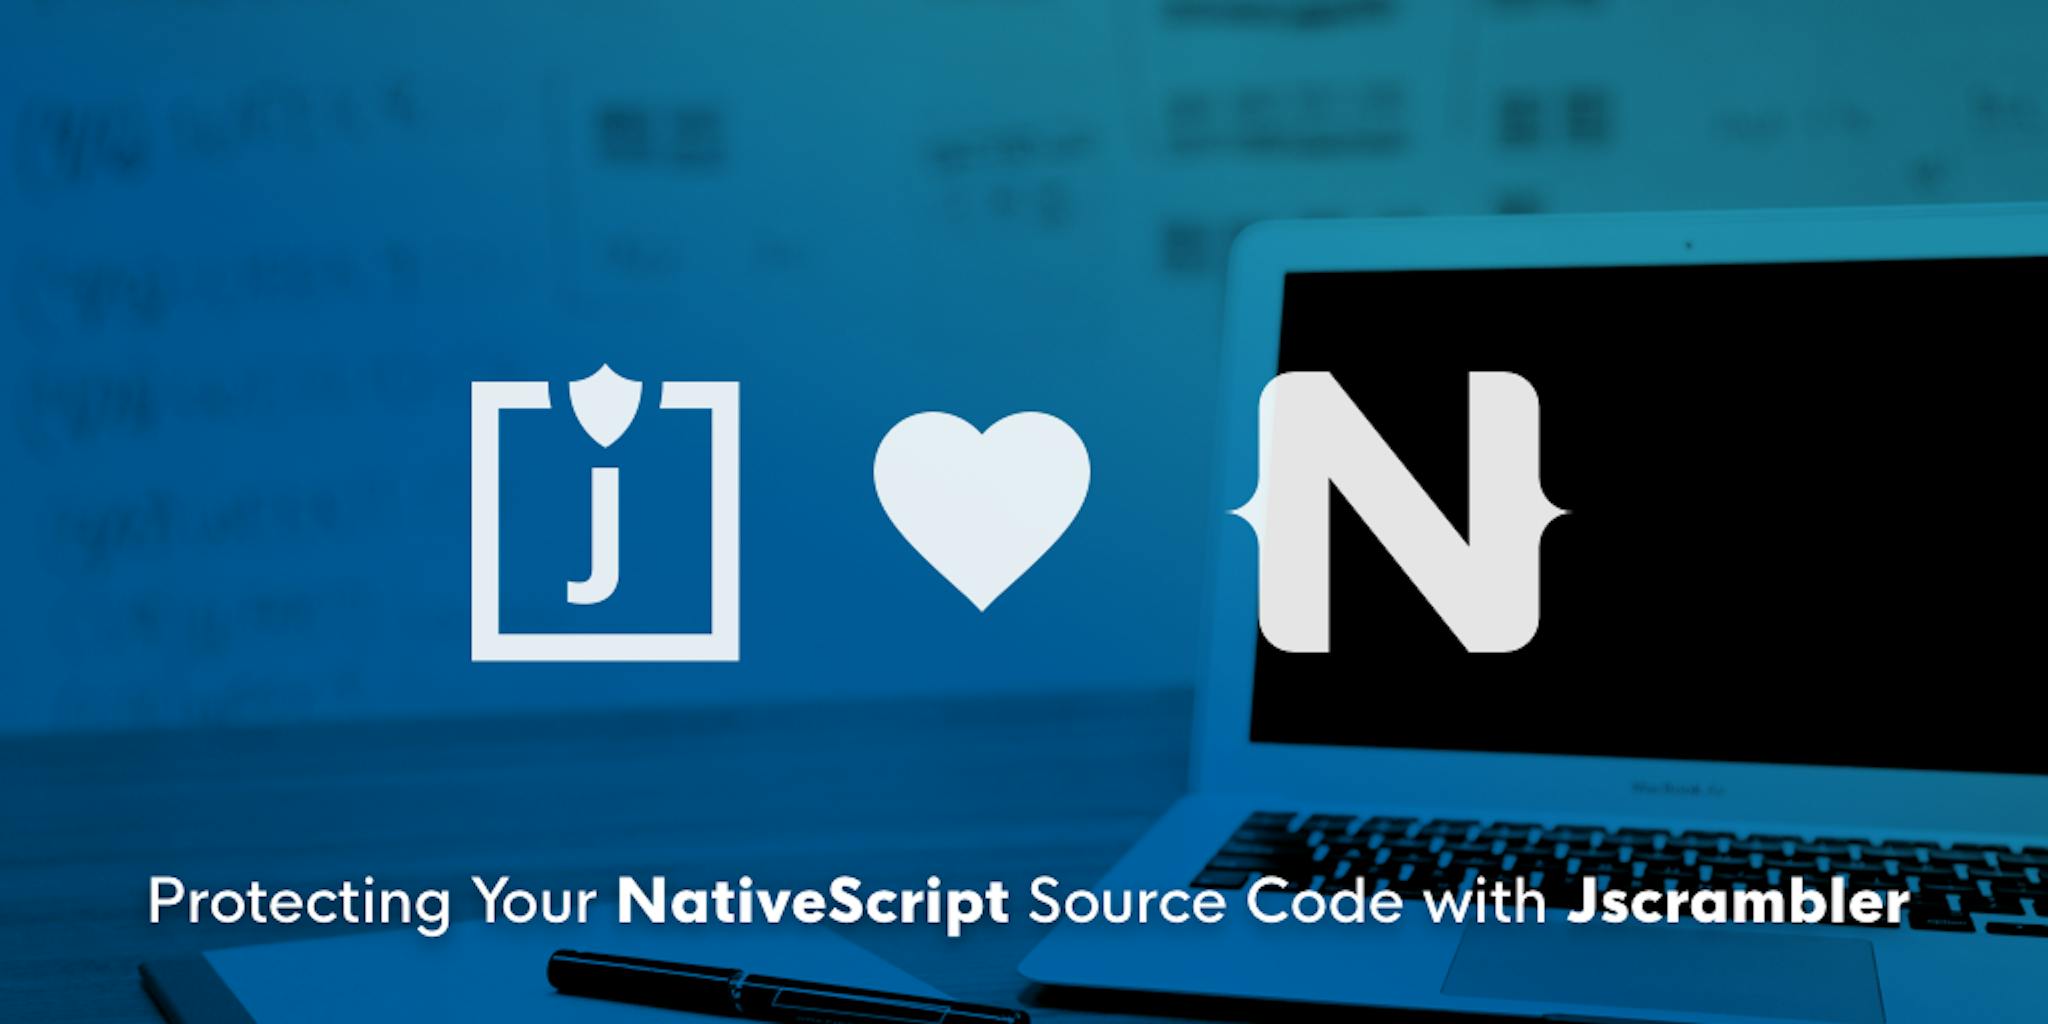 featured image - Protecting Your NativeScript Source Code with Jscrambler